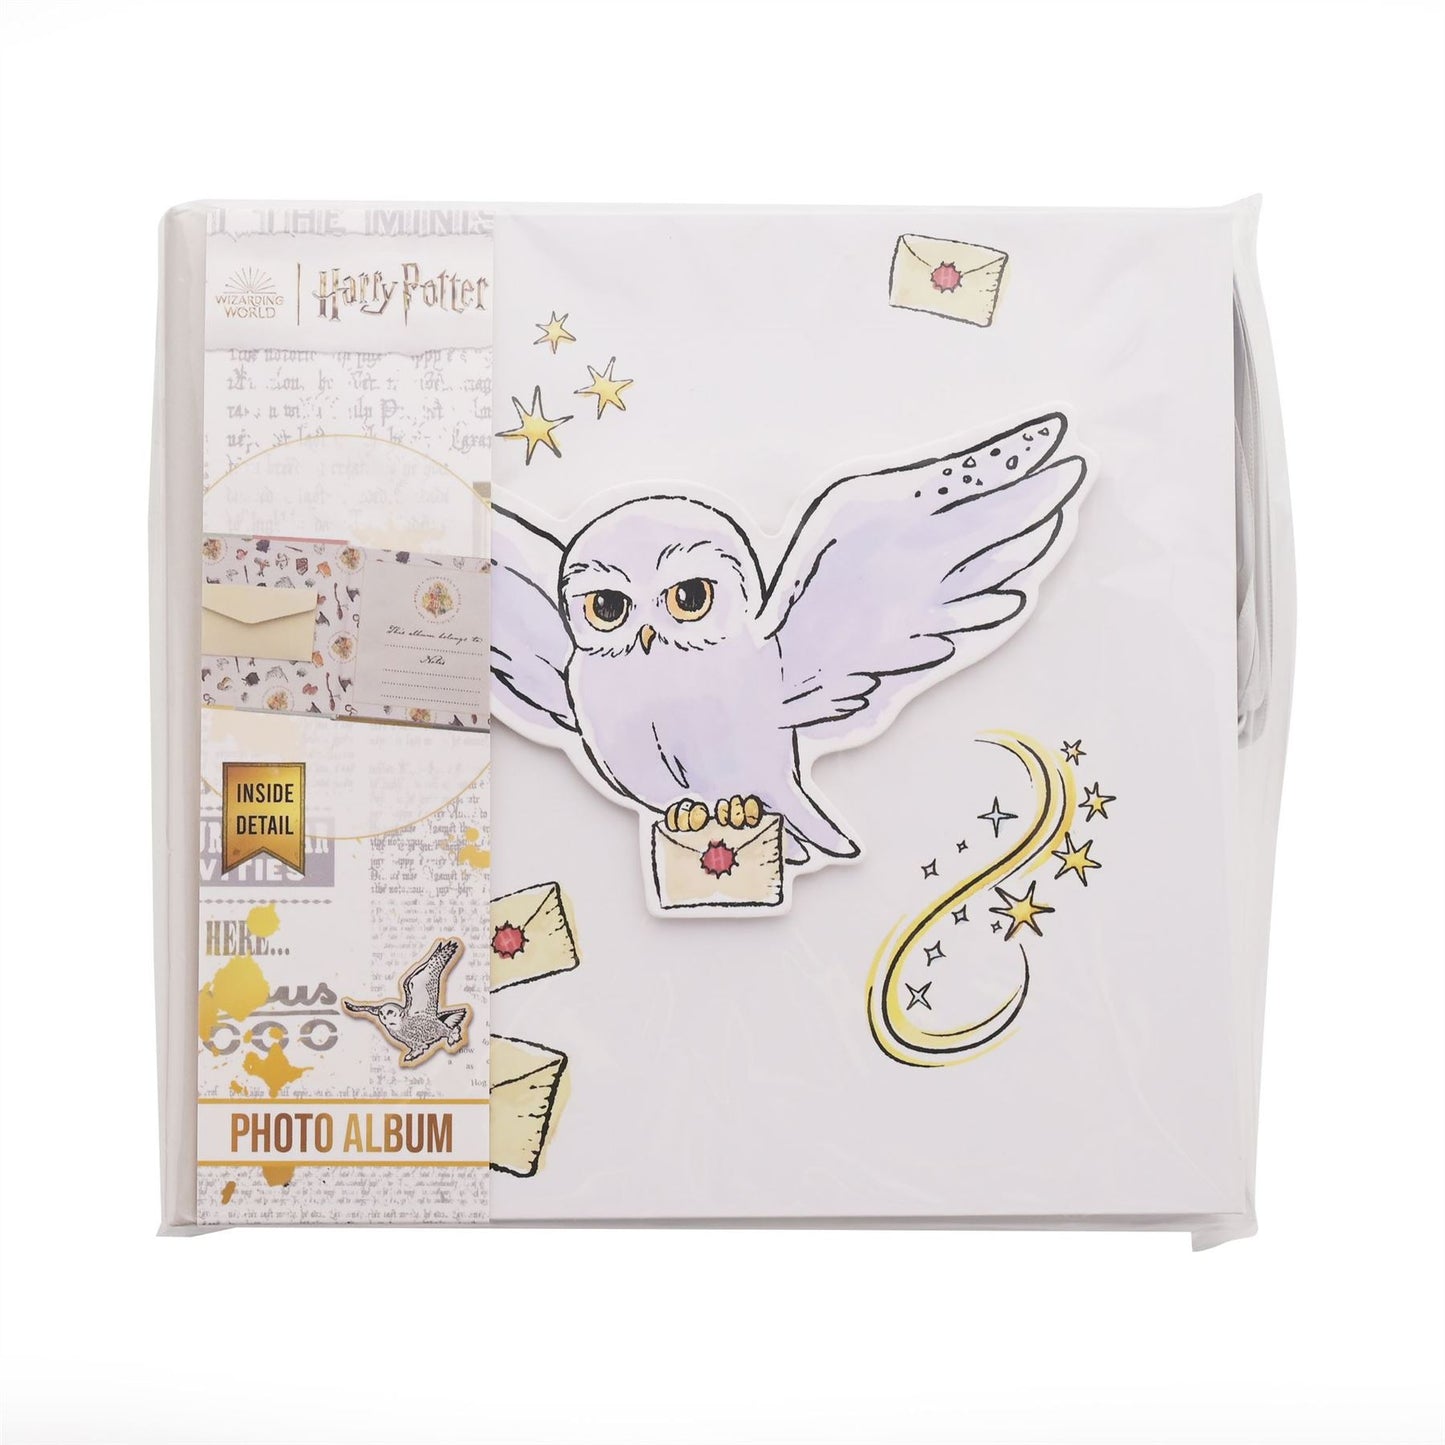 Harry Potter Charms Photo Album - Hedwig